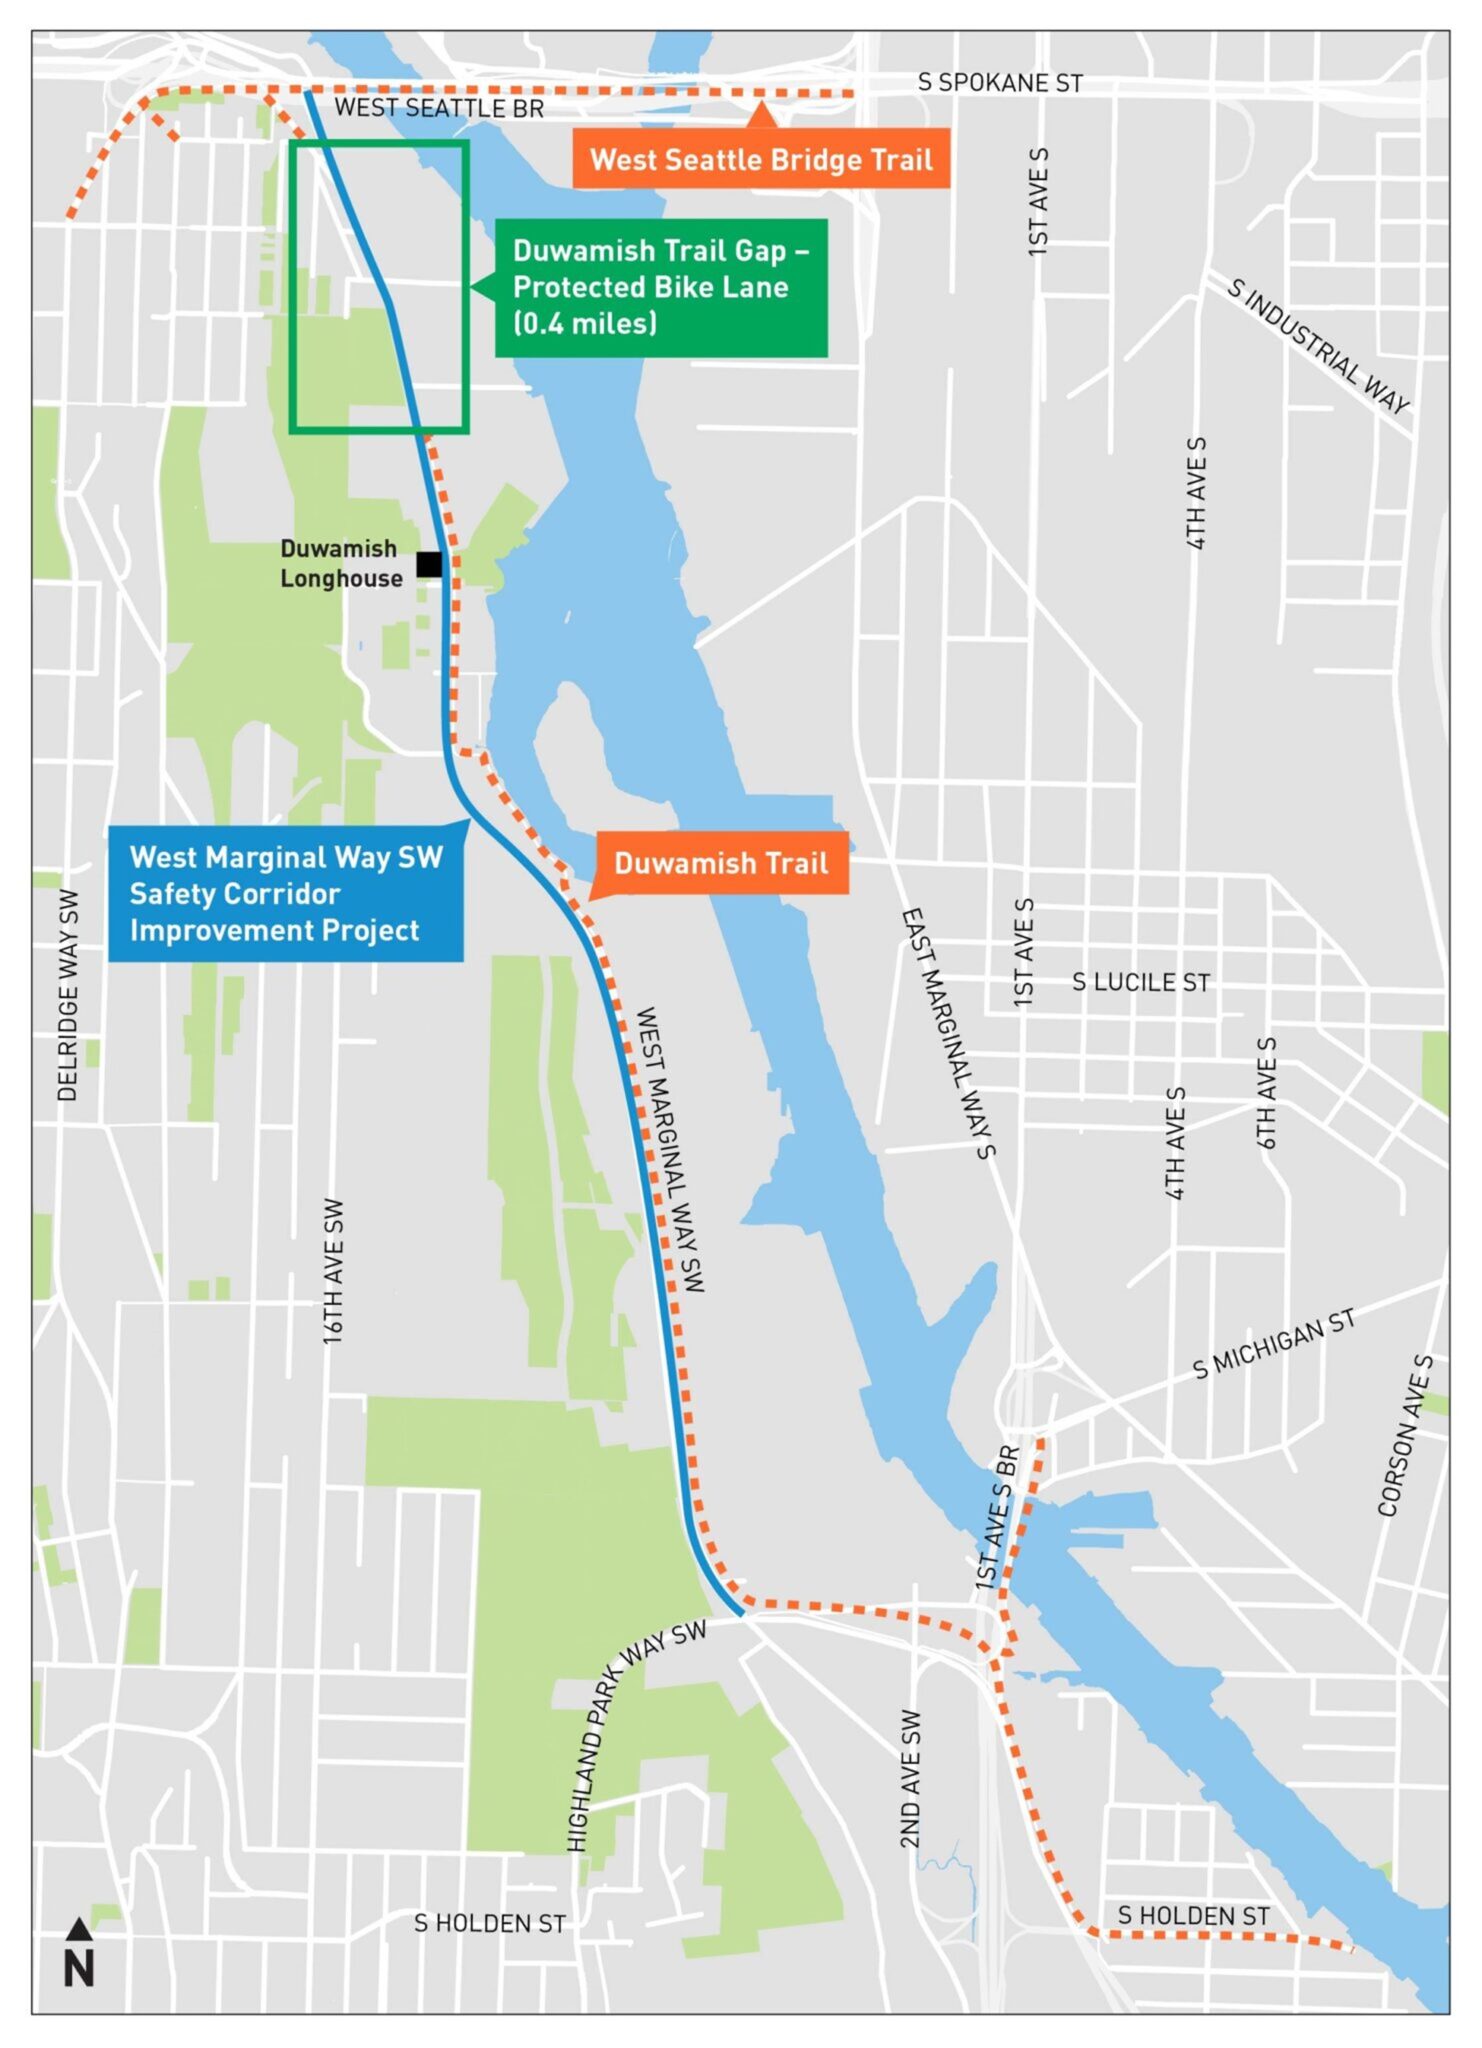 Map graphic showing the West Marginal Way area, including where the project improvements were installed. The main project area is shown with a blue line. The Duwamish Trail is showed in a dotted orange line. A new protected bike lane just south of the West Seattle Bridge is shown in a green box.